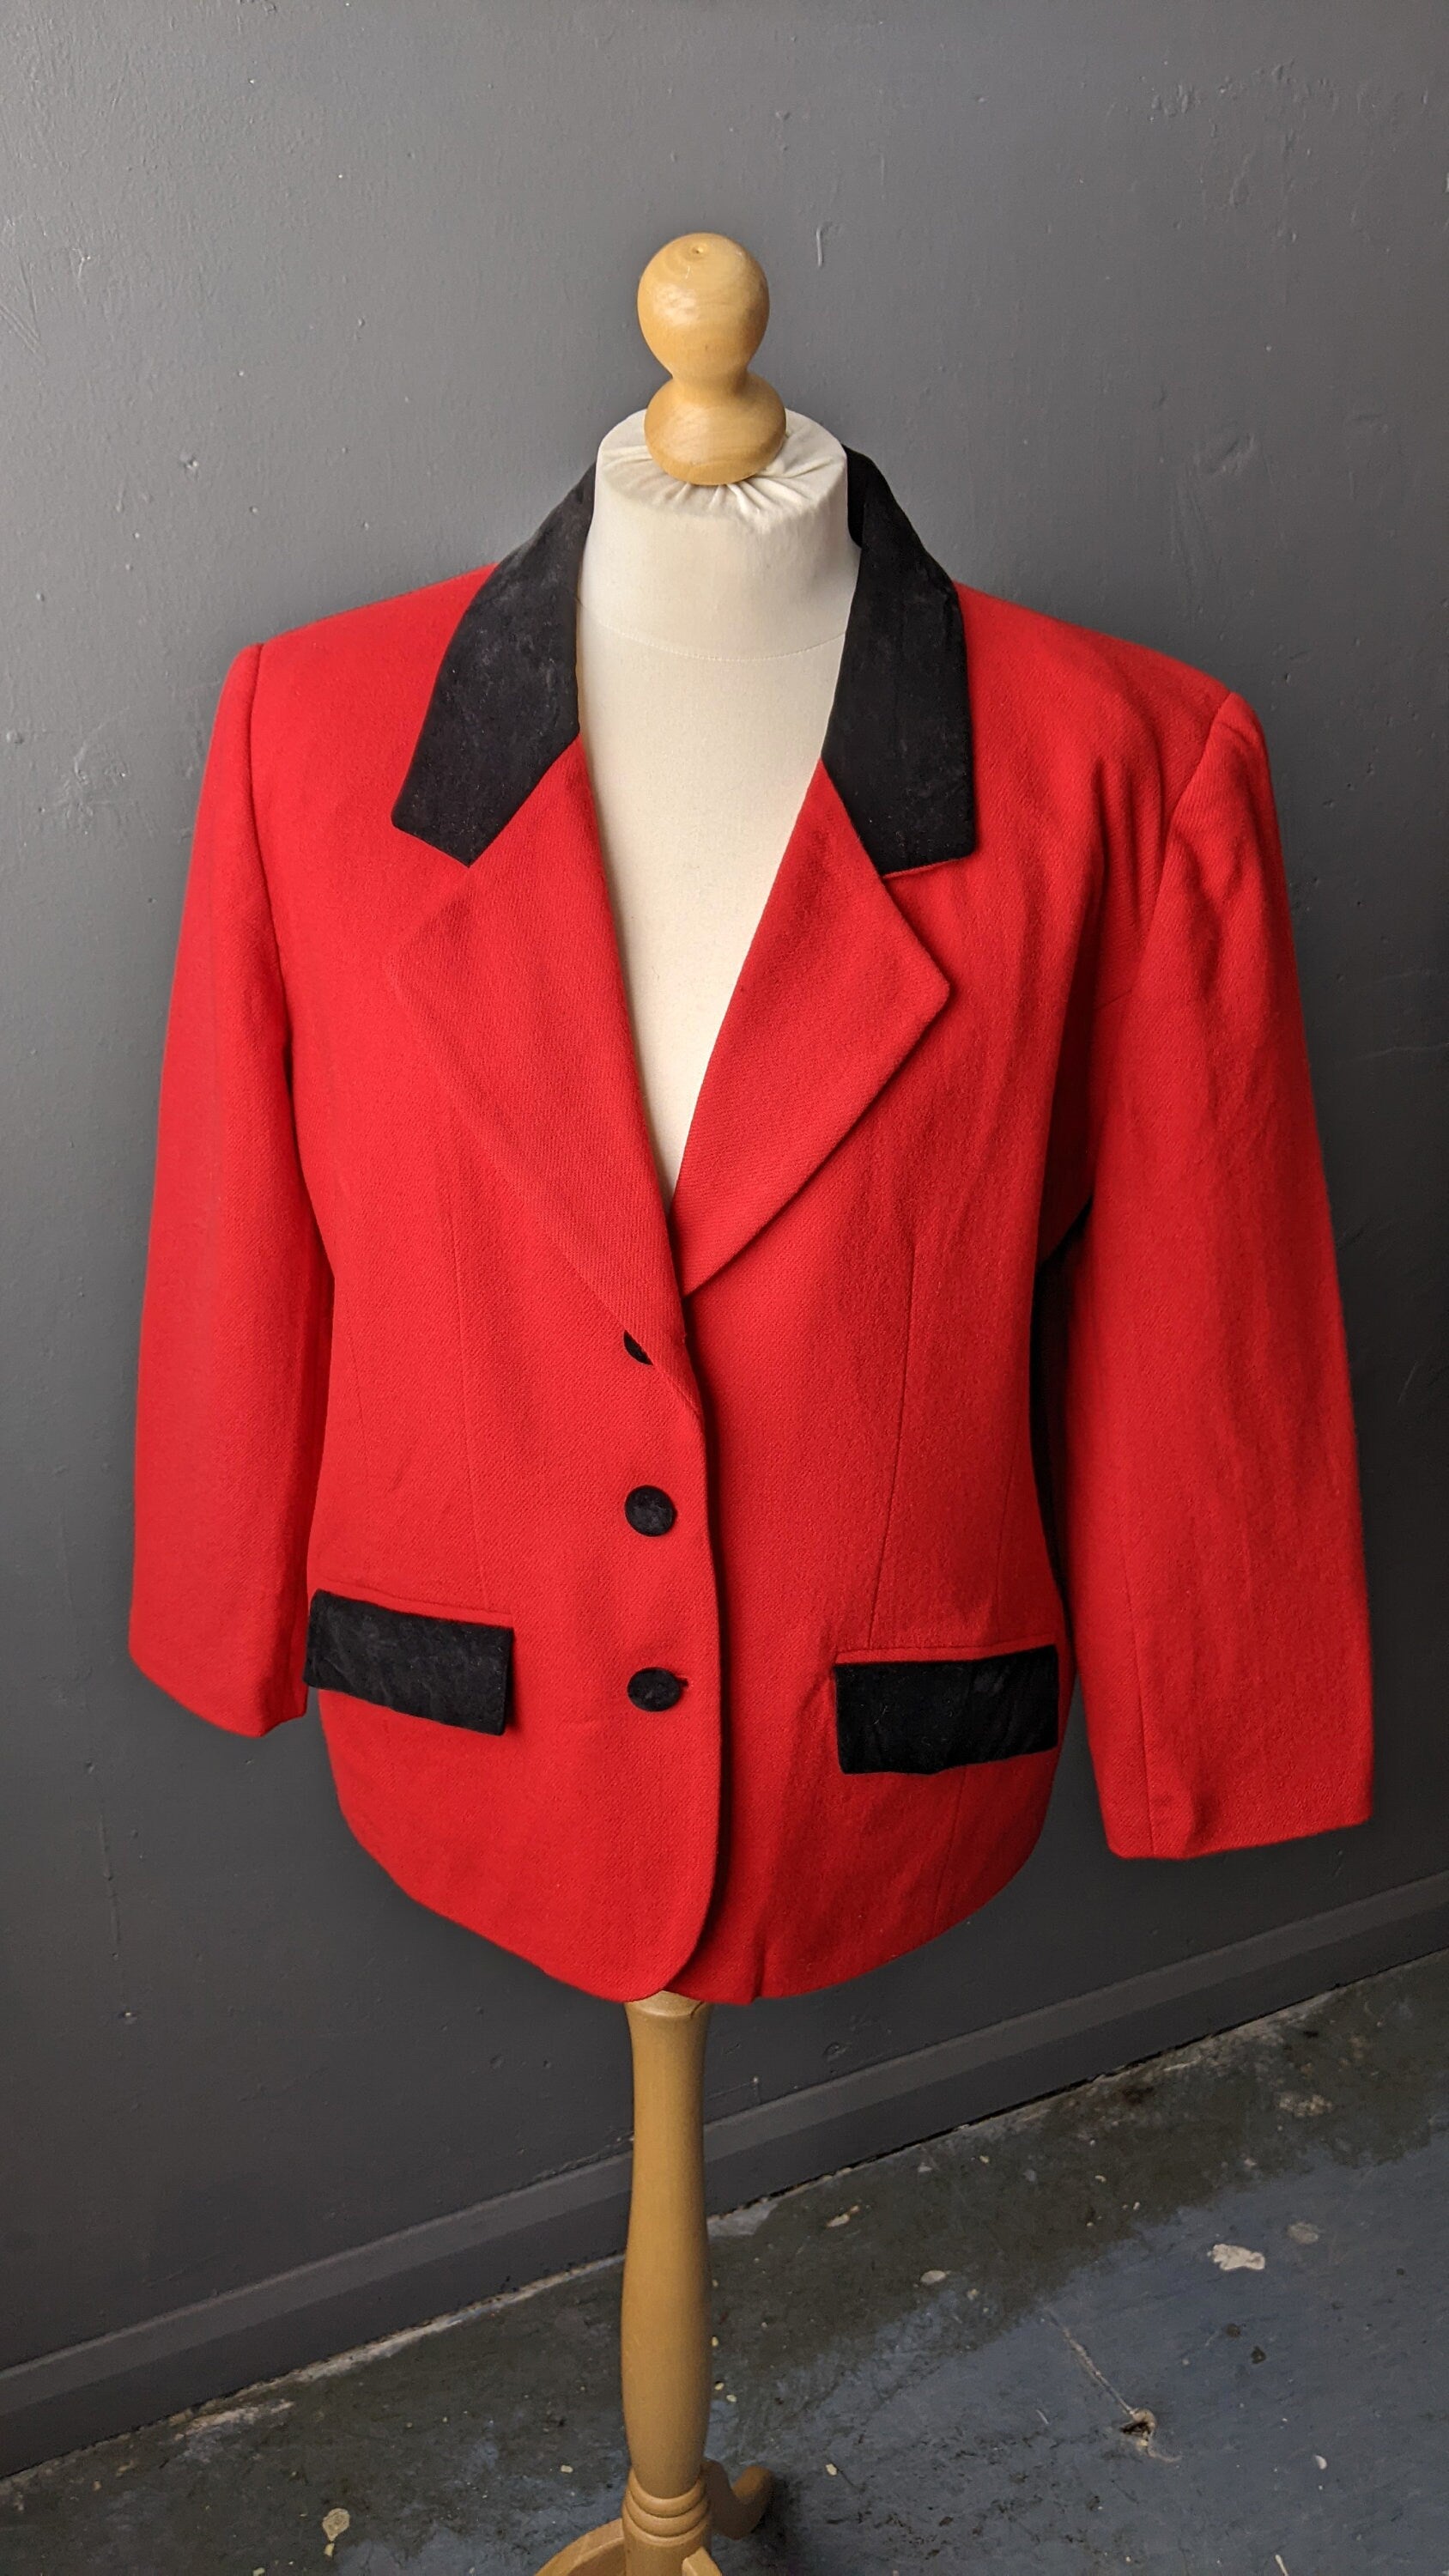 90s Equestrian Style Jacket by Panther Woman, Fitted Show Blazer, Plus Size XL